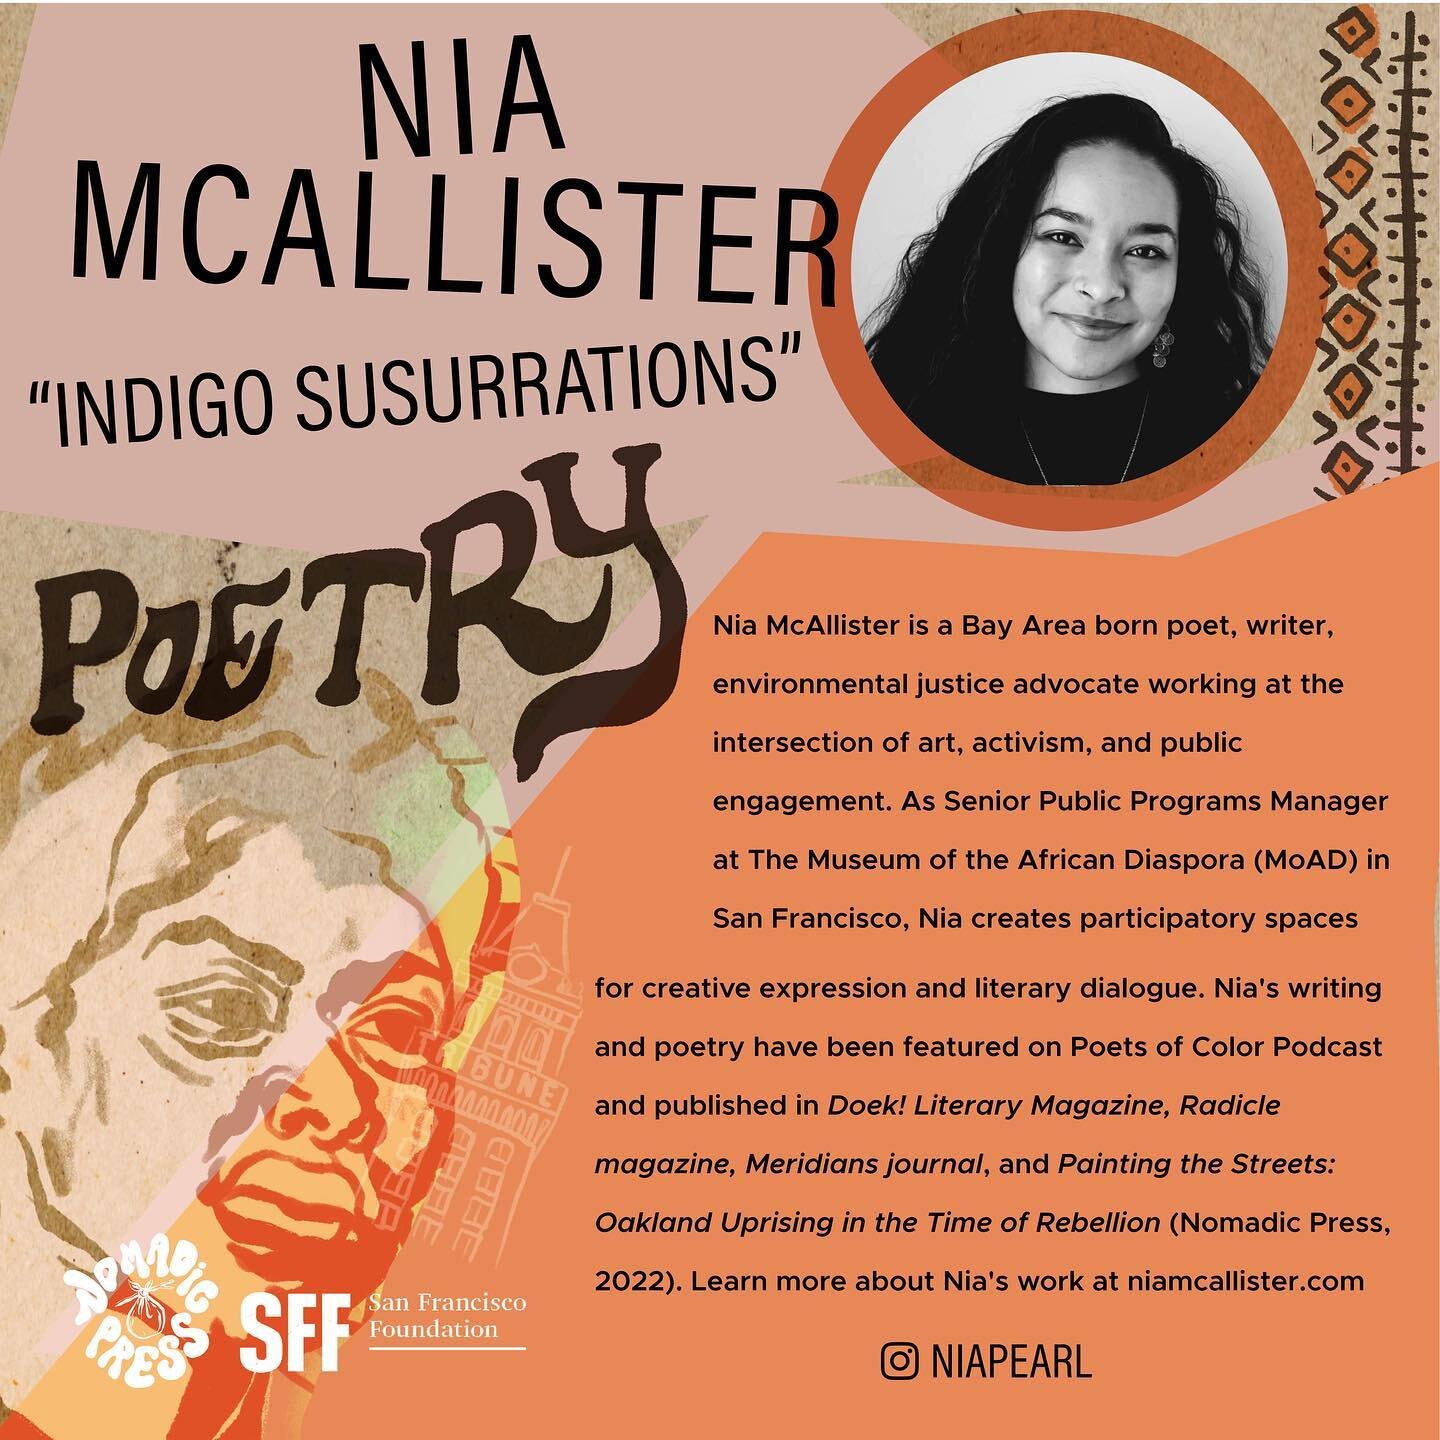 Celebrating Nia McAllister, winner of the 2023 San Francisco Foundation/Nomadic Press Literary Award in Poetry! Nia won $5000 for three poems&mdash;&rdquo;Consort of the Spirits&rdquo;, &ldquo;In the Day Diamonds Are In the Water&rdquo;, &ldquo;Say H